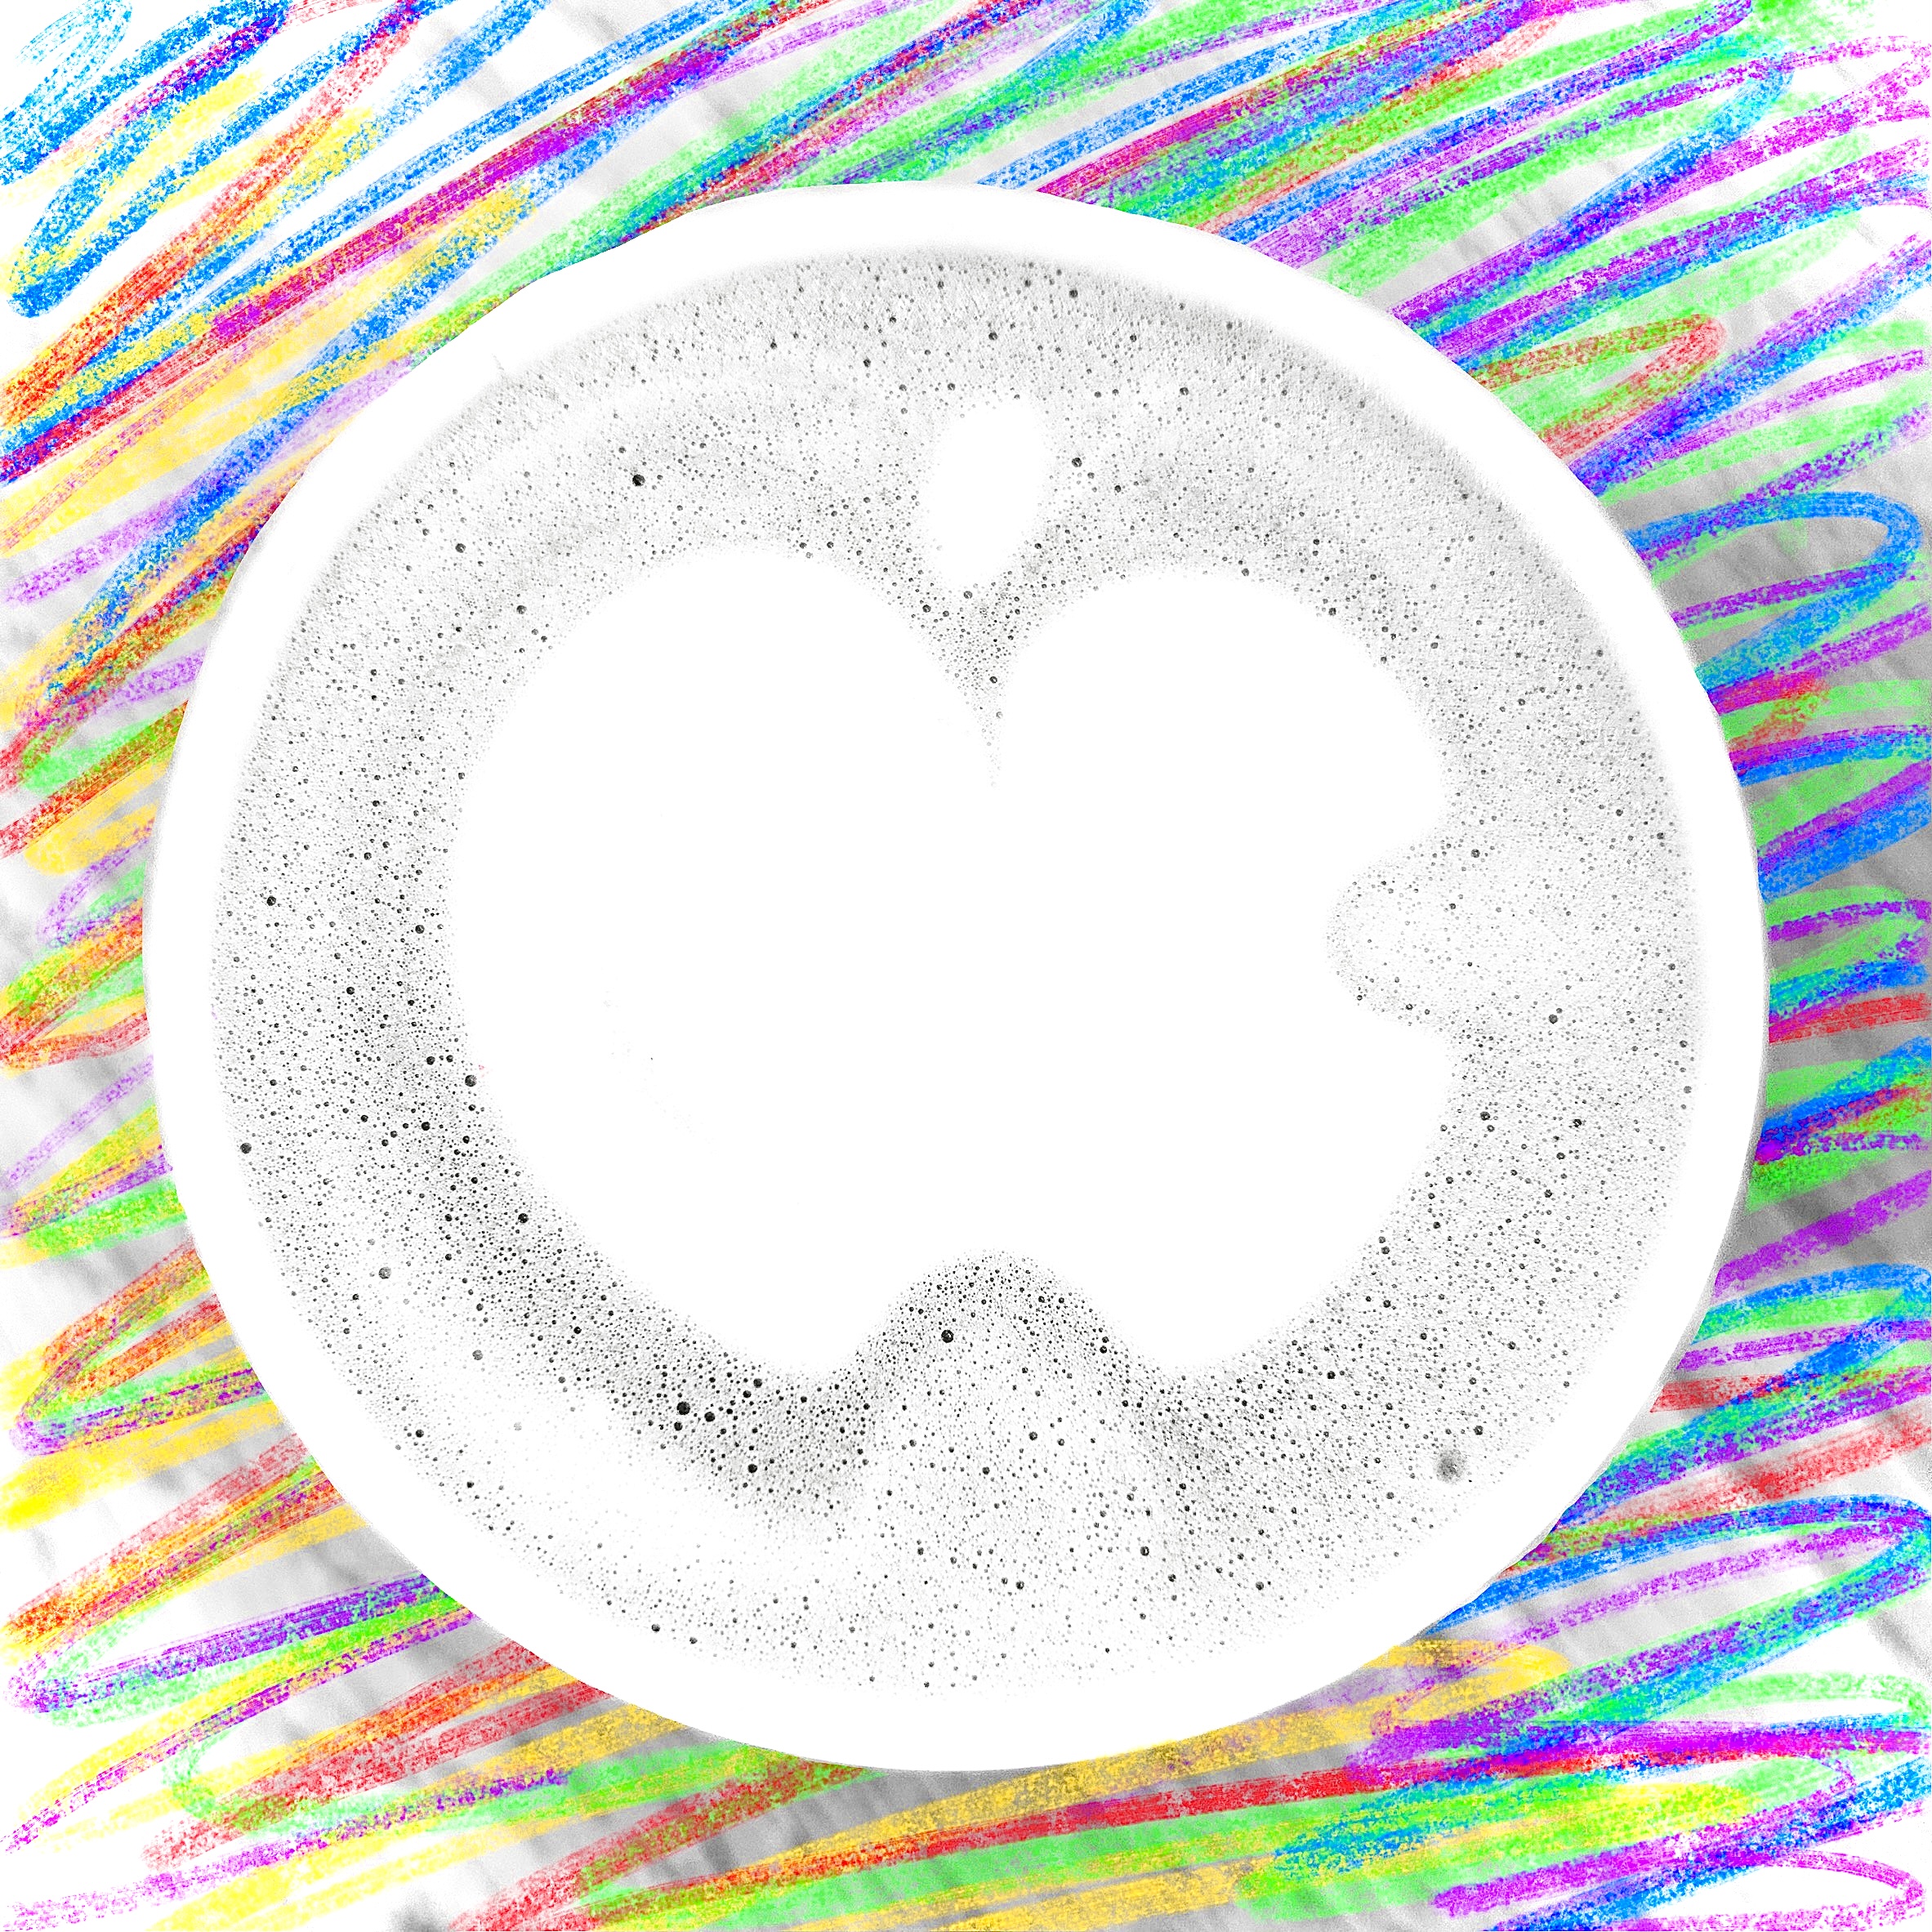 An overhead view of a latte with the Apple logo created with foam art. Image enhanced with colors and shapes.